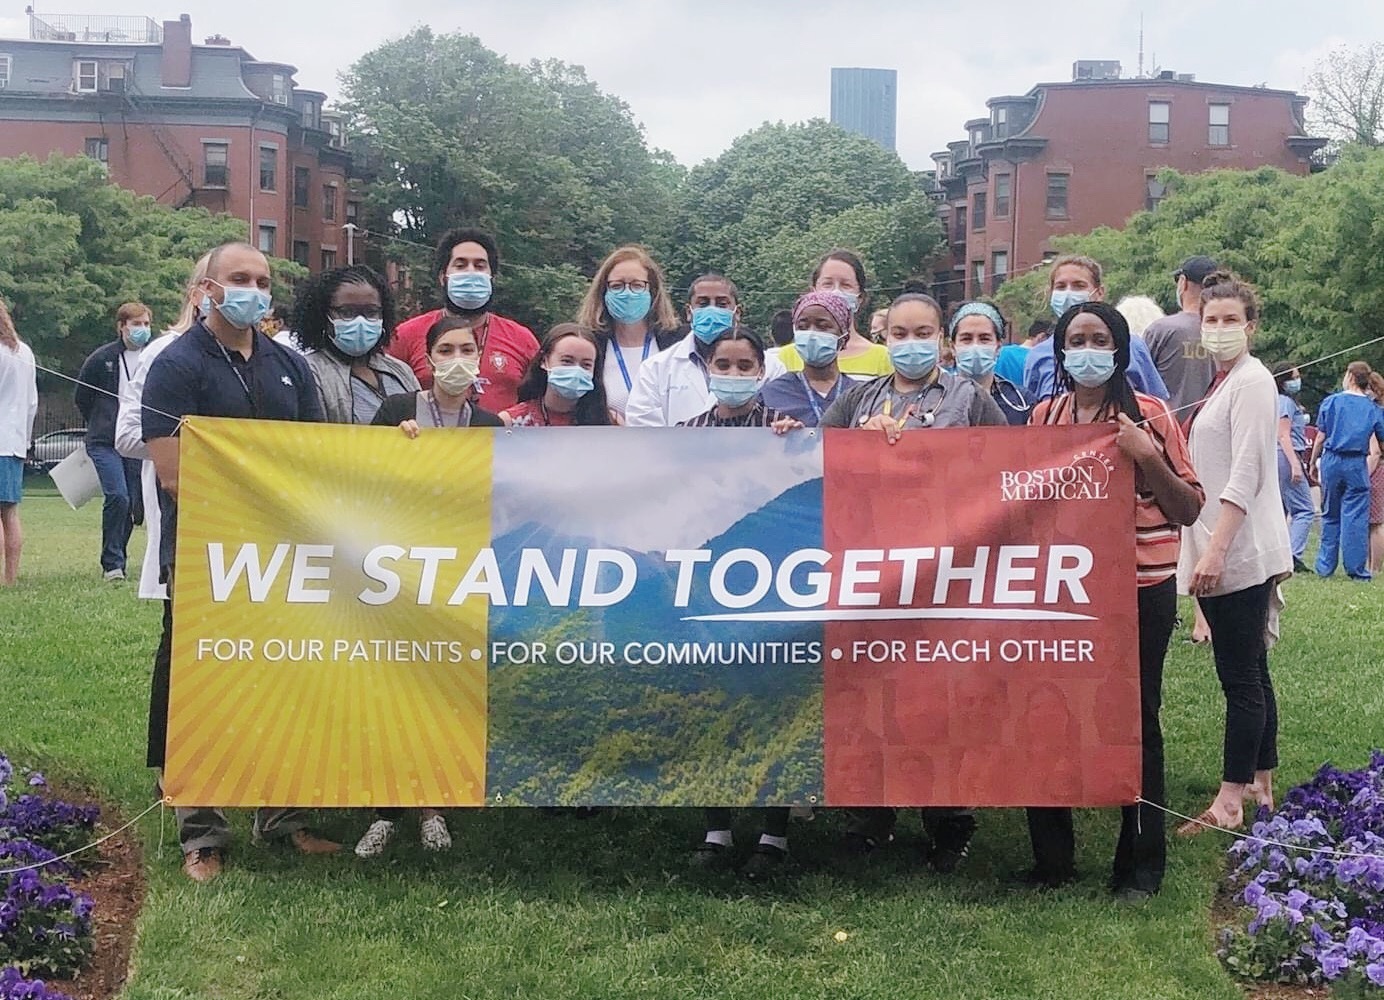 BMC employees wearing masks holding up "We Stand Together" poster at White Coats for Black Lives event